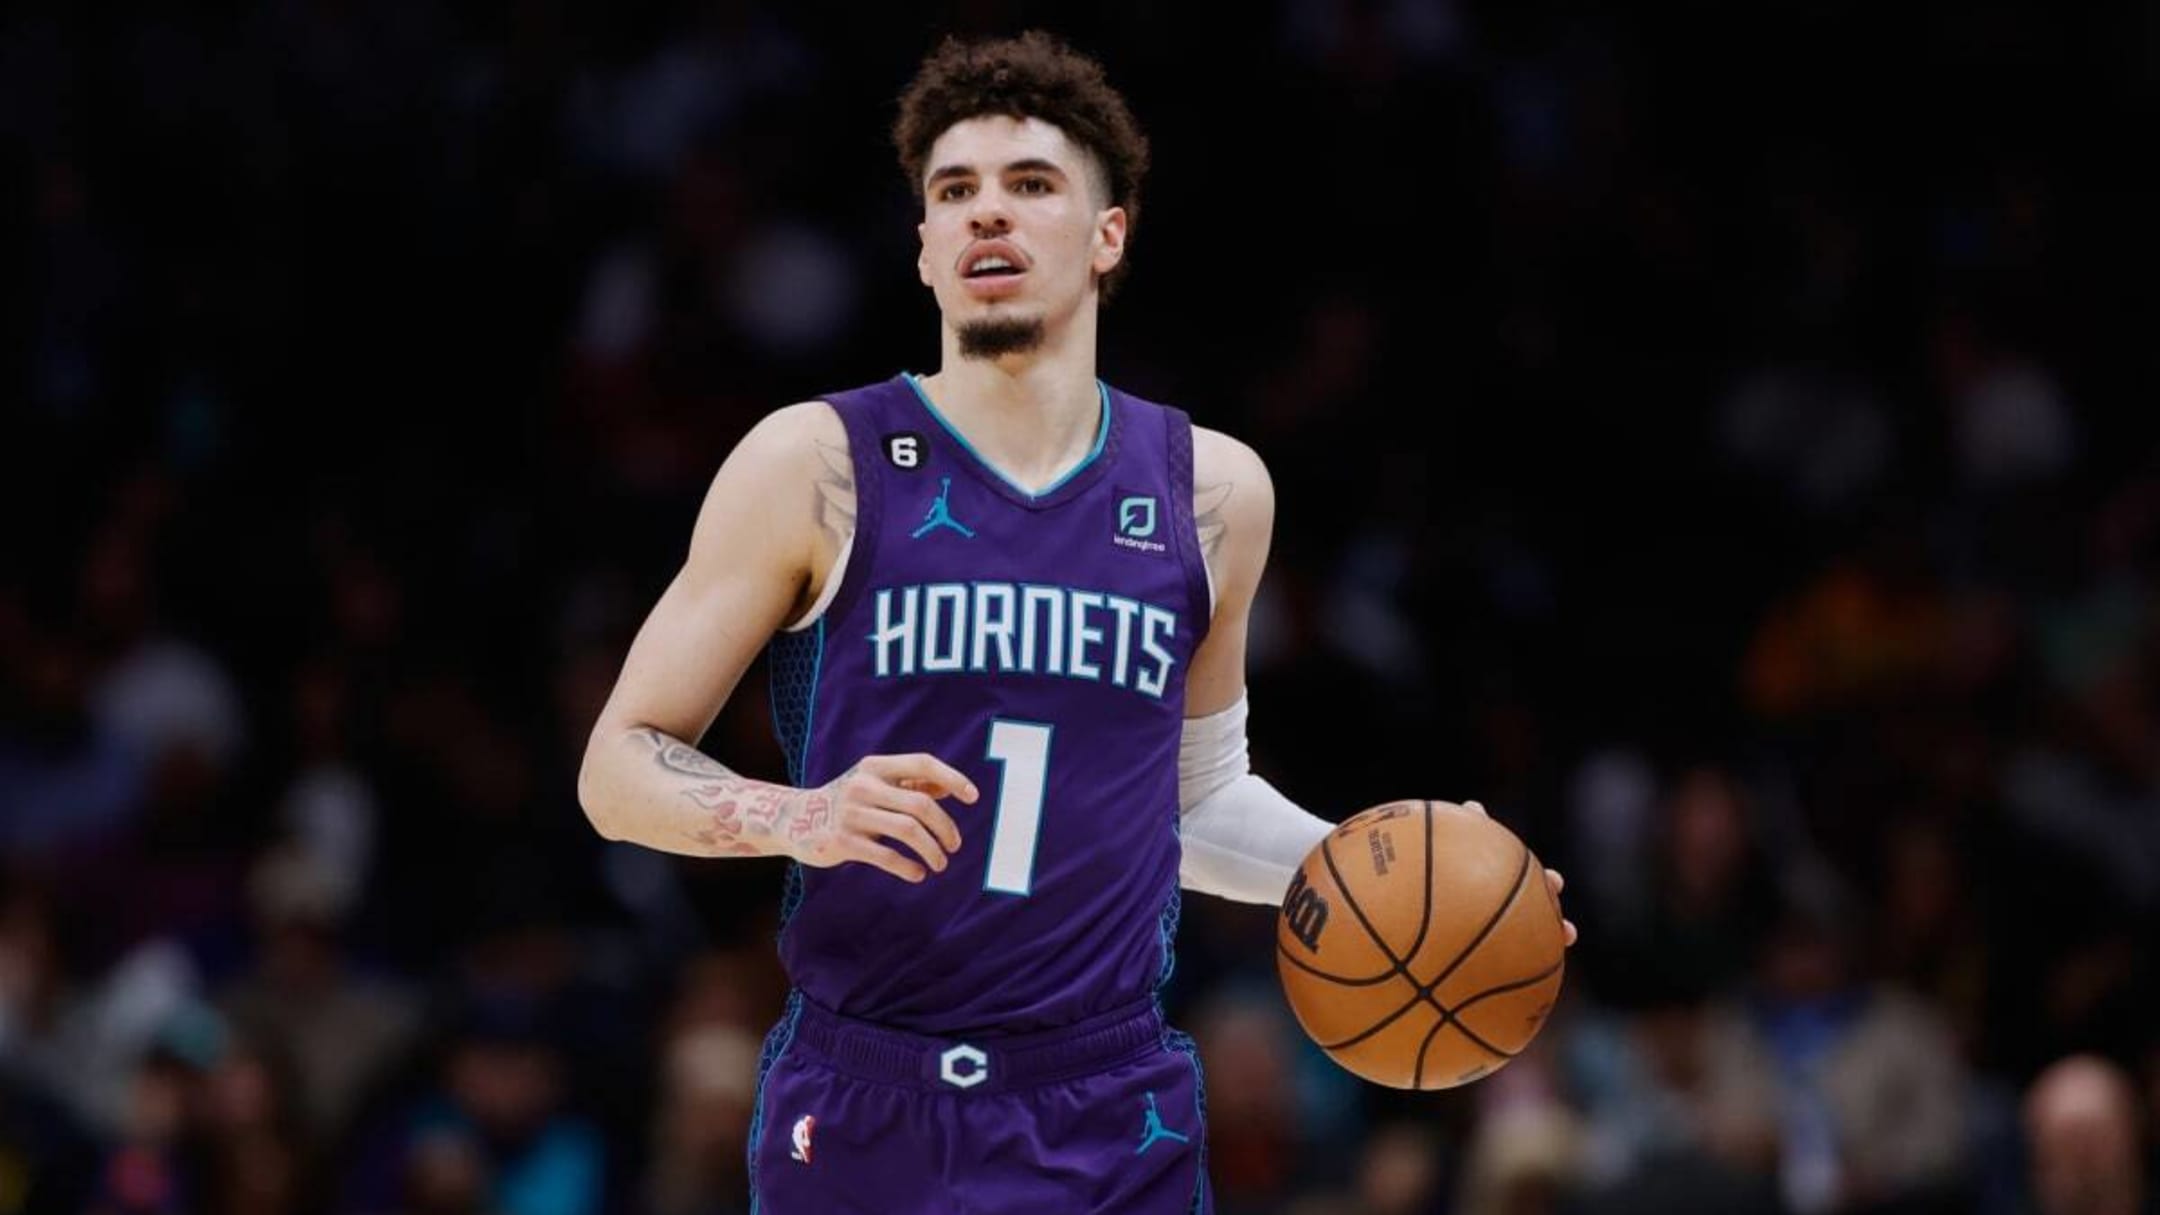 Charlotte Hornets guard LaMelo Ball (1) brings the ball up court